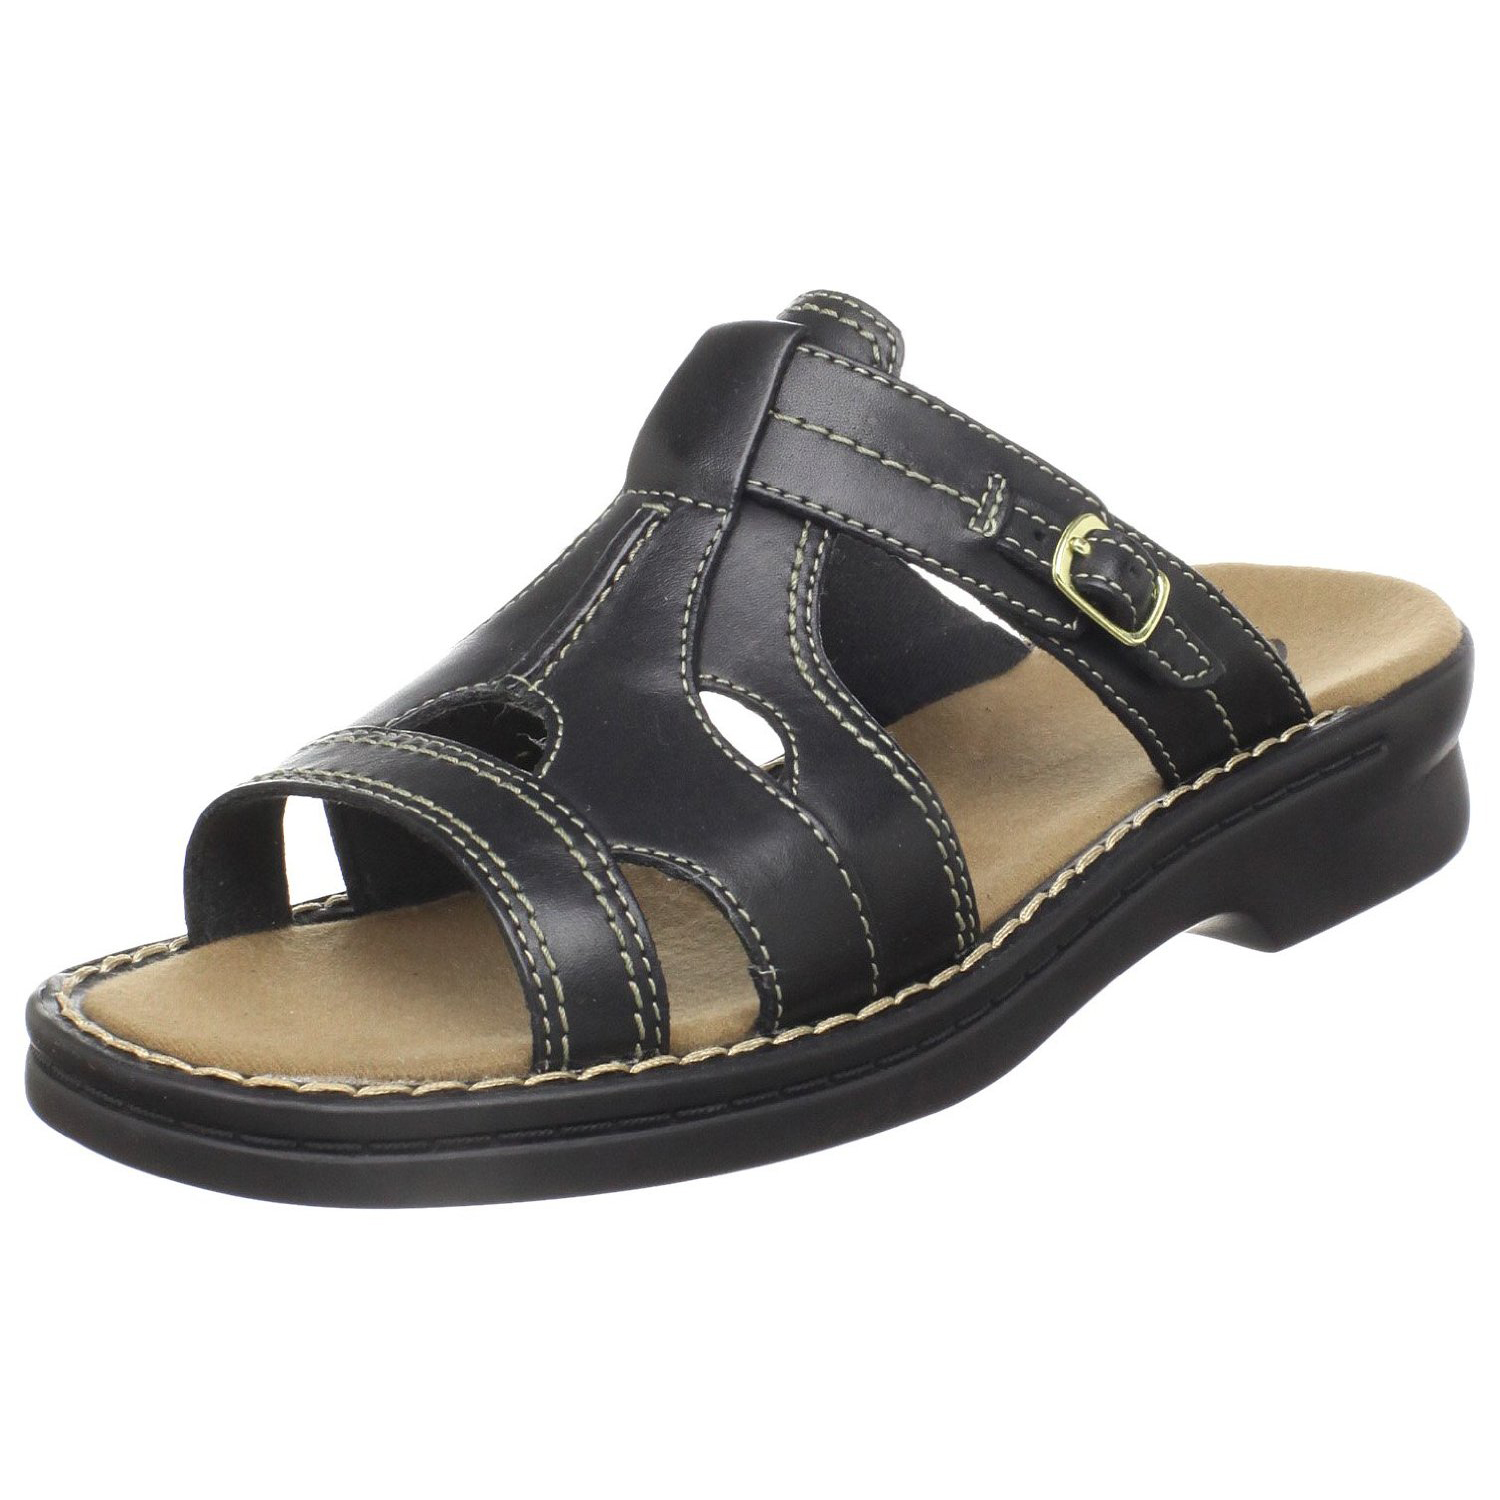 Clarks Women's Patty Argentina Sandal from $25